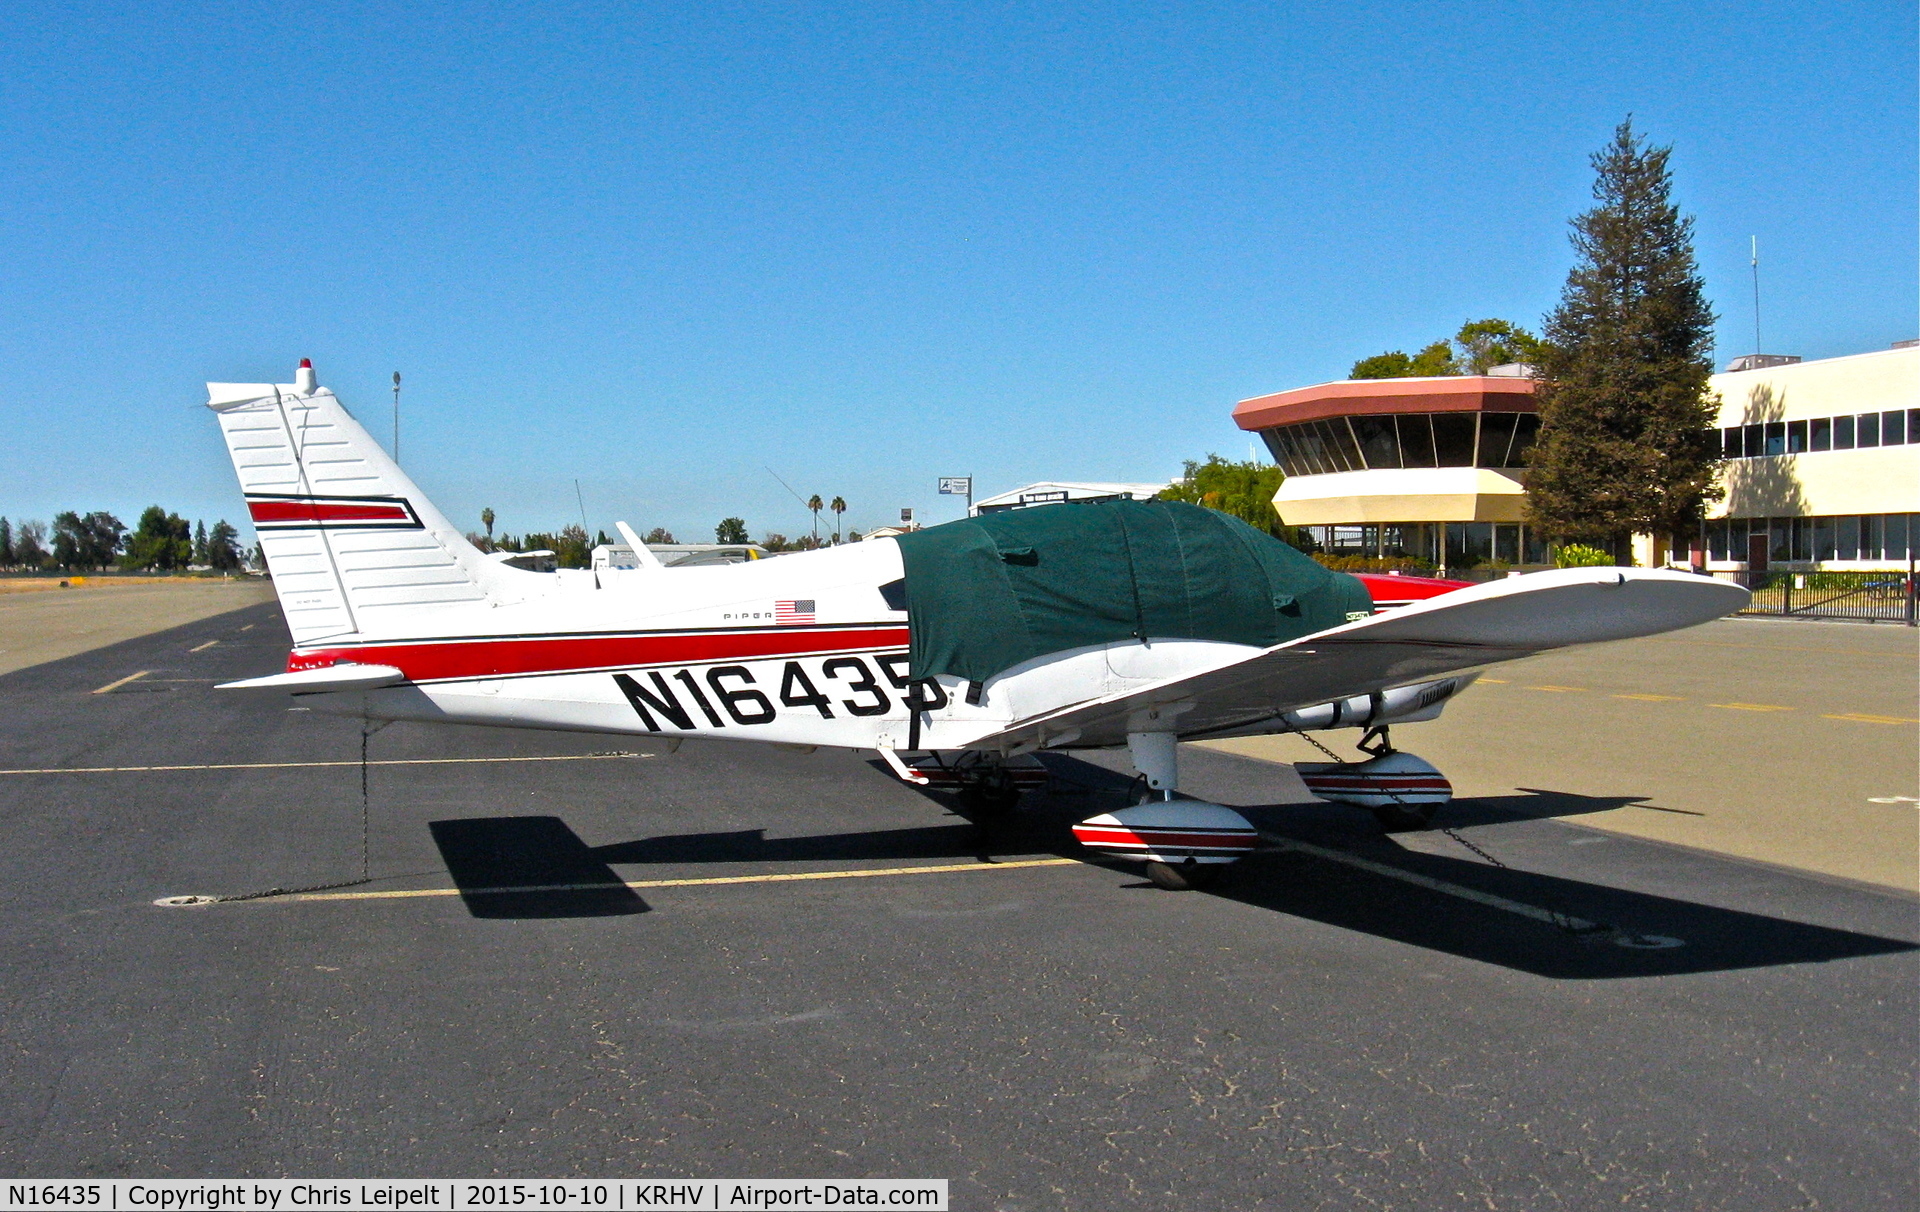 N16435, 1973 Piper PA-28-180 C/N 28-7305254, Nevada-based 1973 Piper PA-28-180 sitting on the visitor's ramp at Reid Hillview Airport, San Jose, CA.